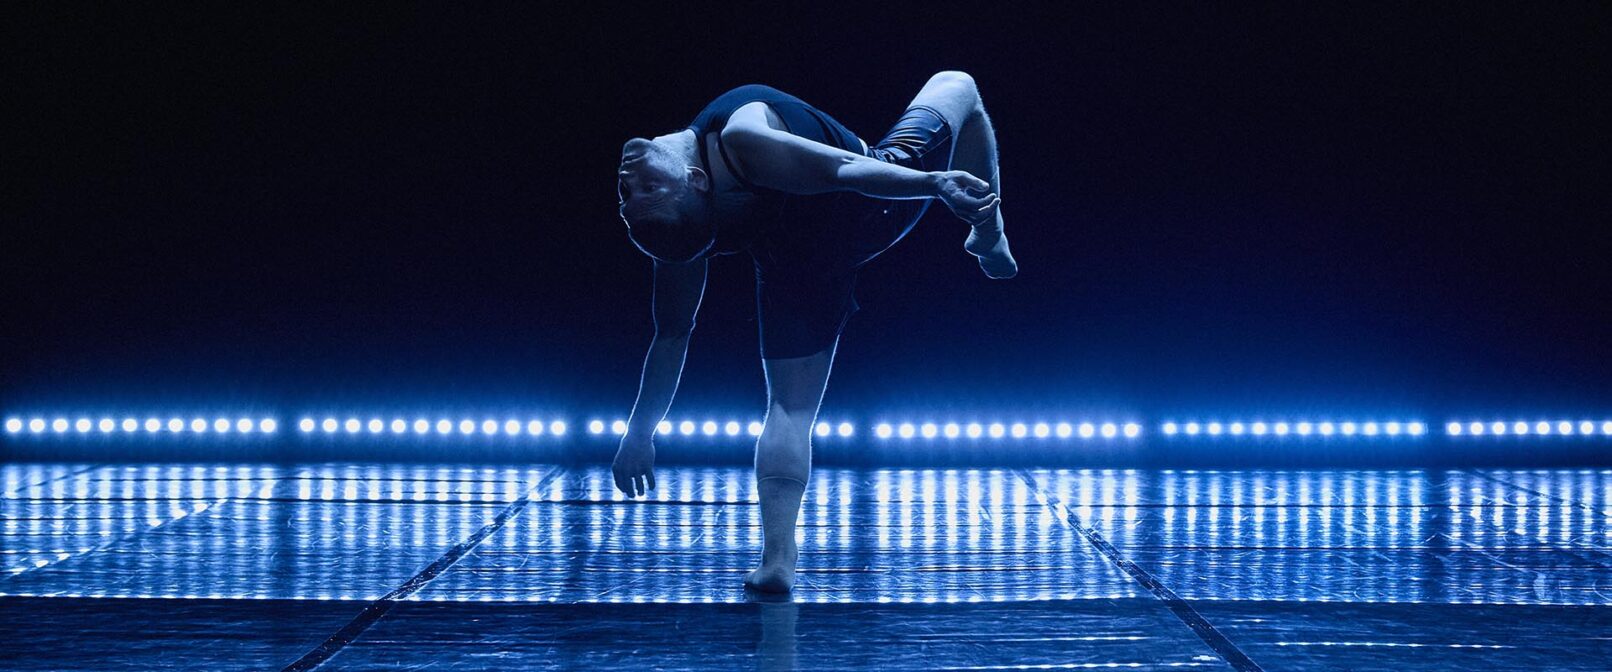 Guillaume Cote Danse. A dancer stands centre stage bending backwards with one leg raised and knee bent. The top half of the background appears dark, while the bottom half is a projection of blue light and shadow forming a row of narrow vertical bars.